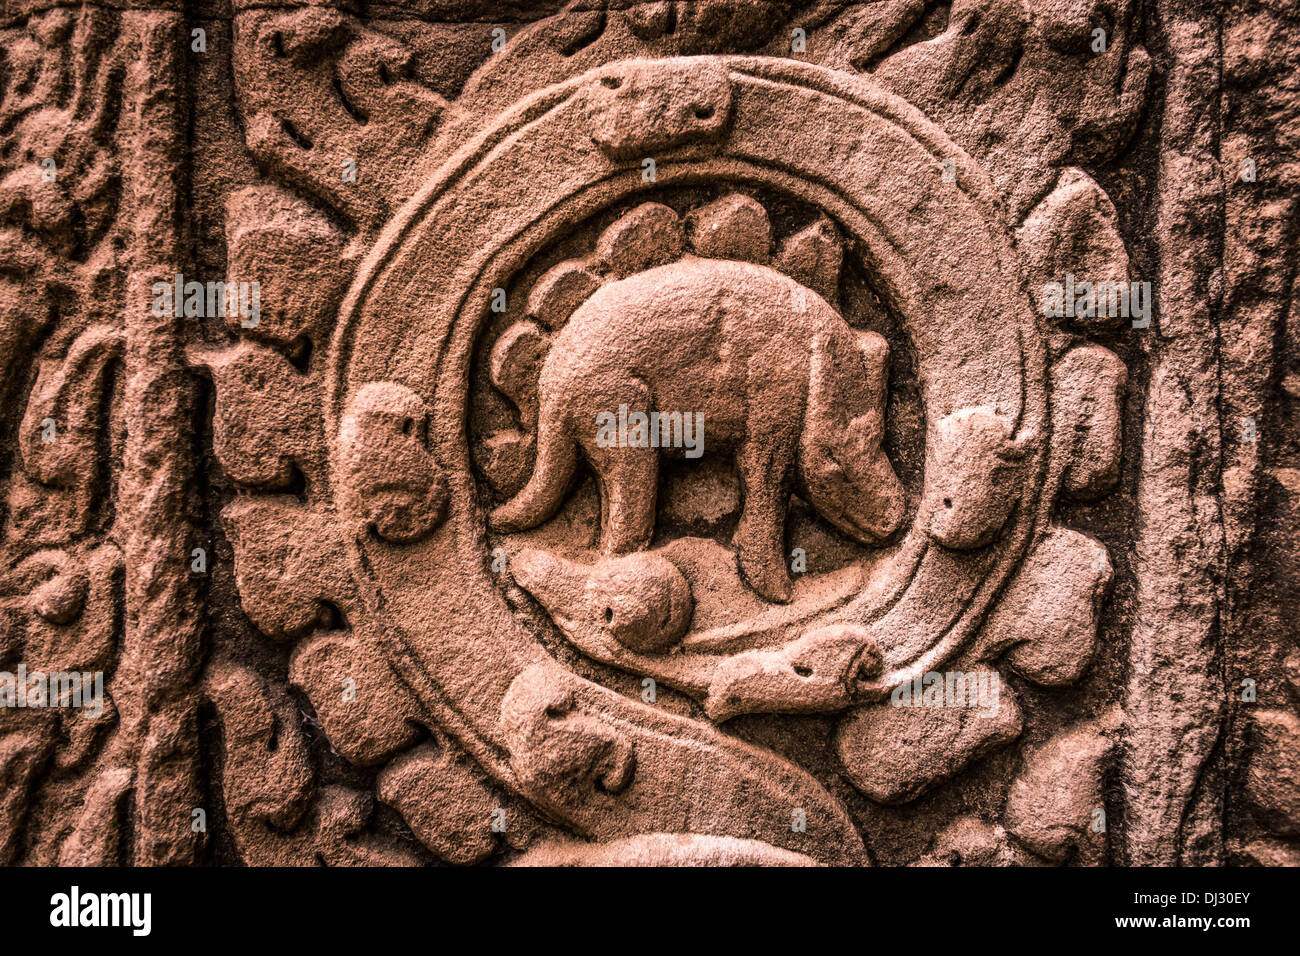 The 'Dinosaur' carving on one of the walls inside the Ta Prohm Temple, Cambodia. Stock Photo